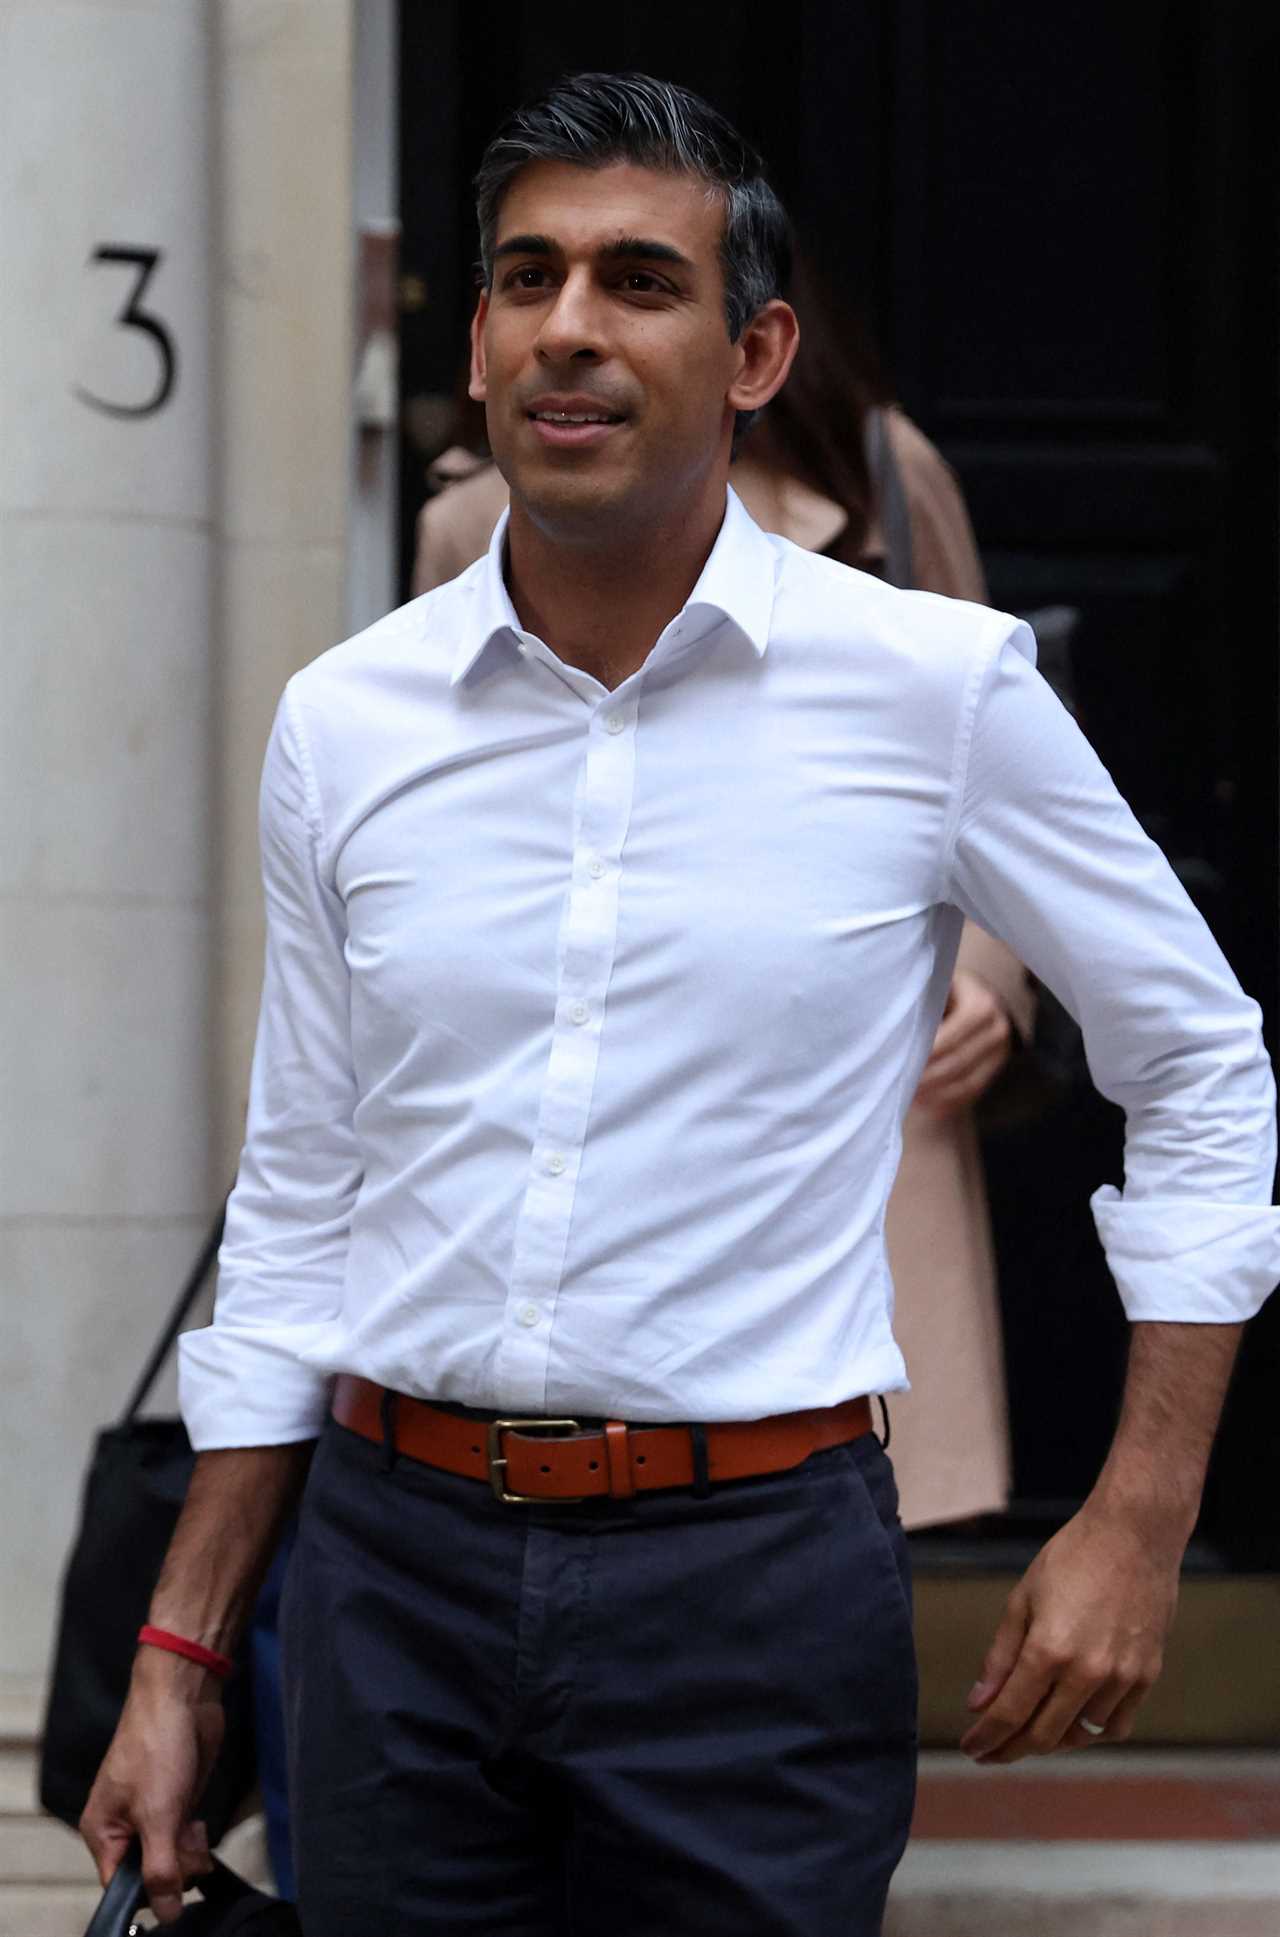 Boris Johnson supporters say he has 100 backers in PM race after ‘asking Penny to drop out’ as Rishi Sunak confirms bid